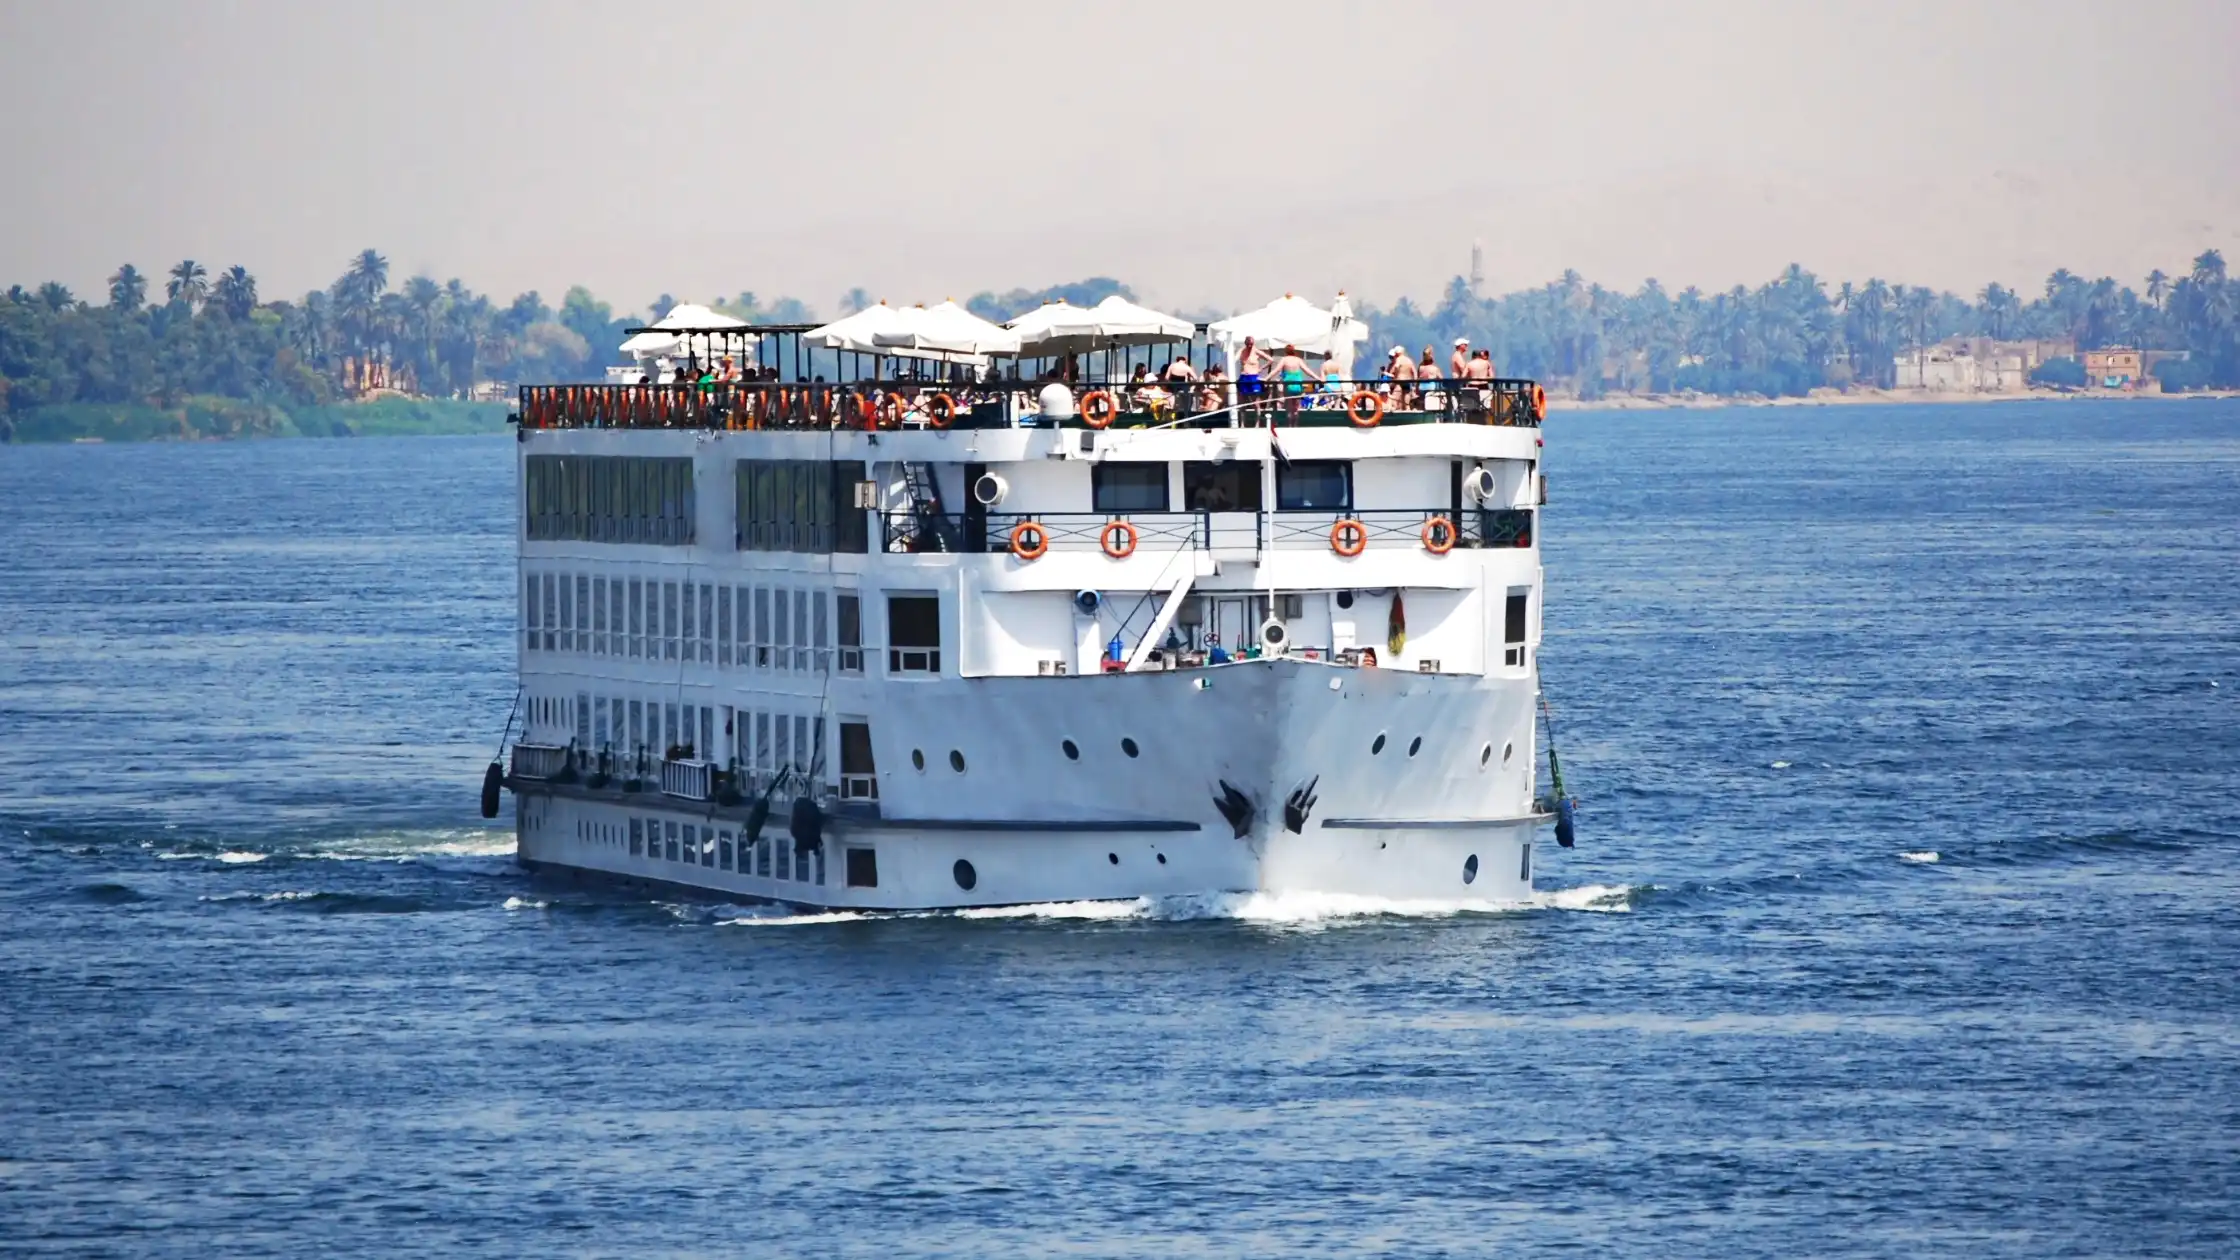 4 Night Nile cruise from Luxor to Aswan including (Abu simple temple & Luxor hot air balloon)